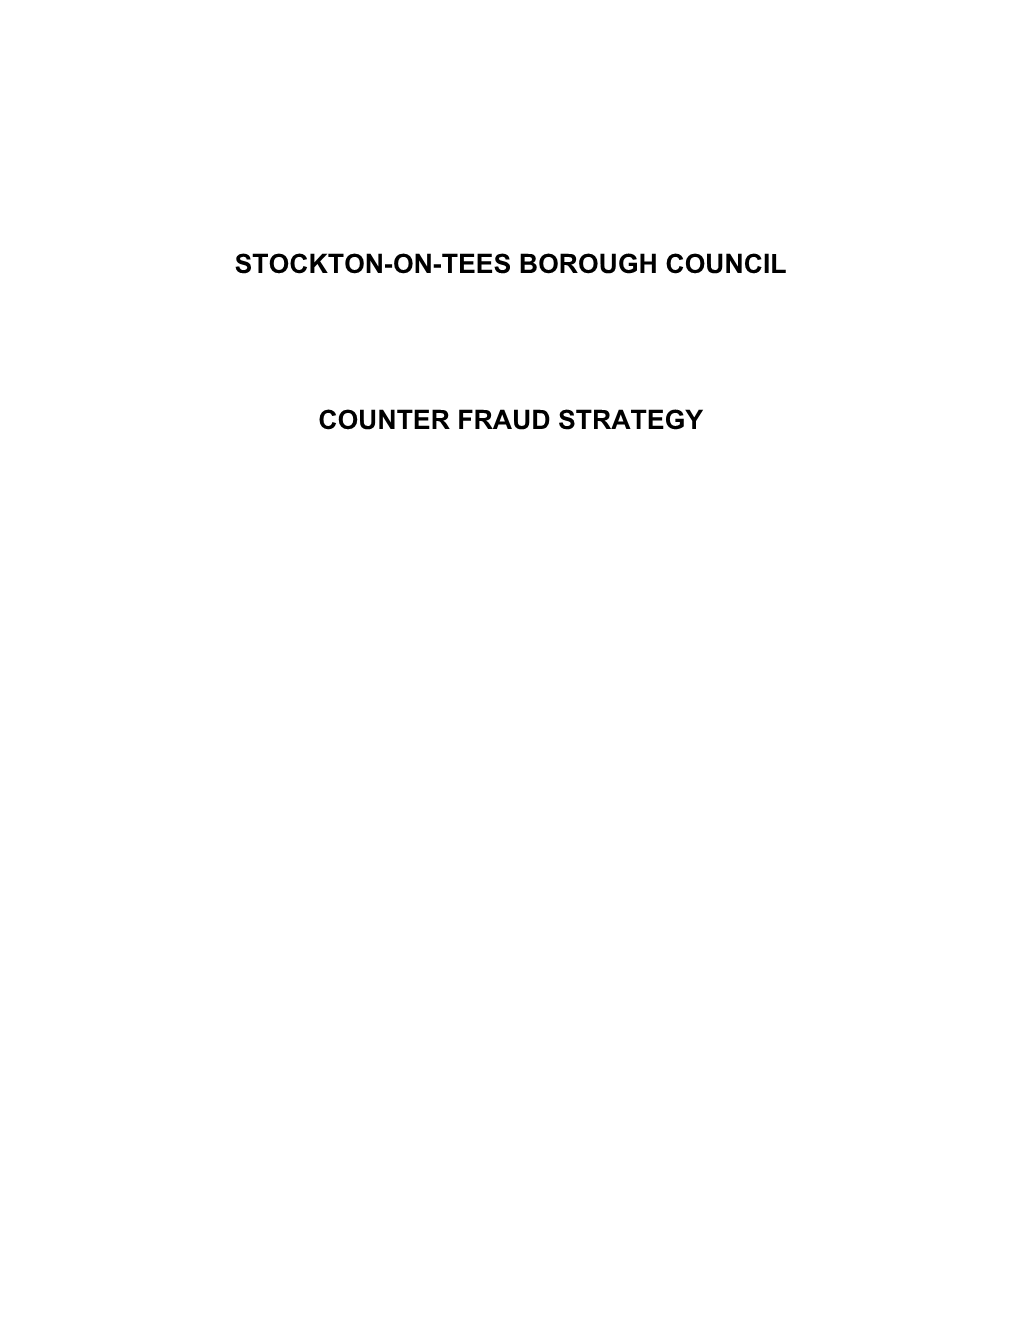 Counter Fraud Strategy 2011-2014